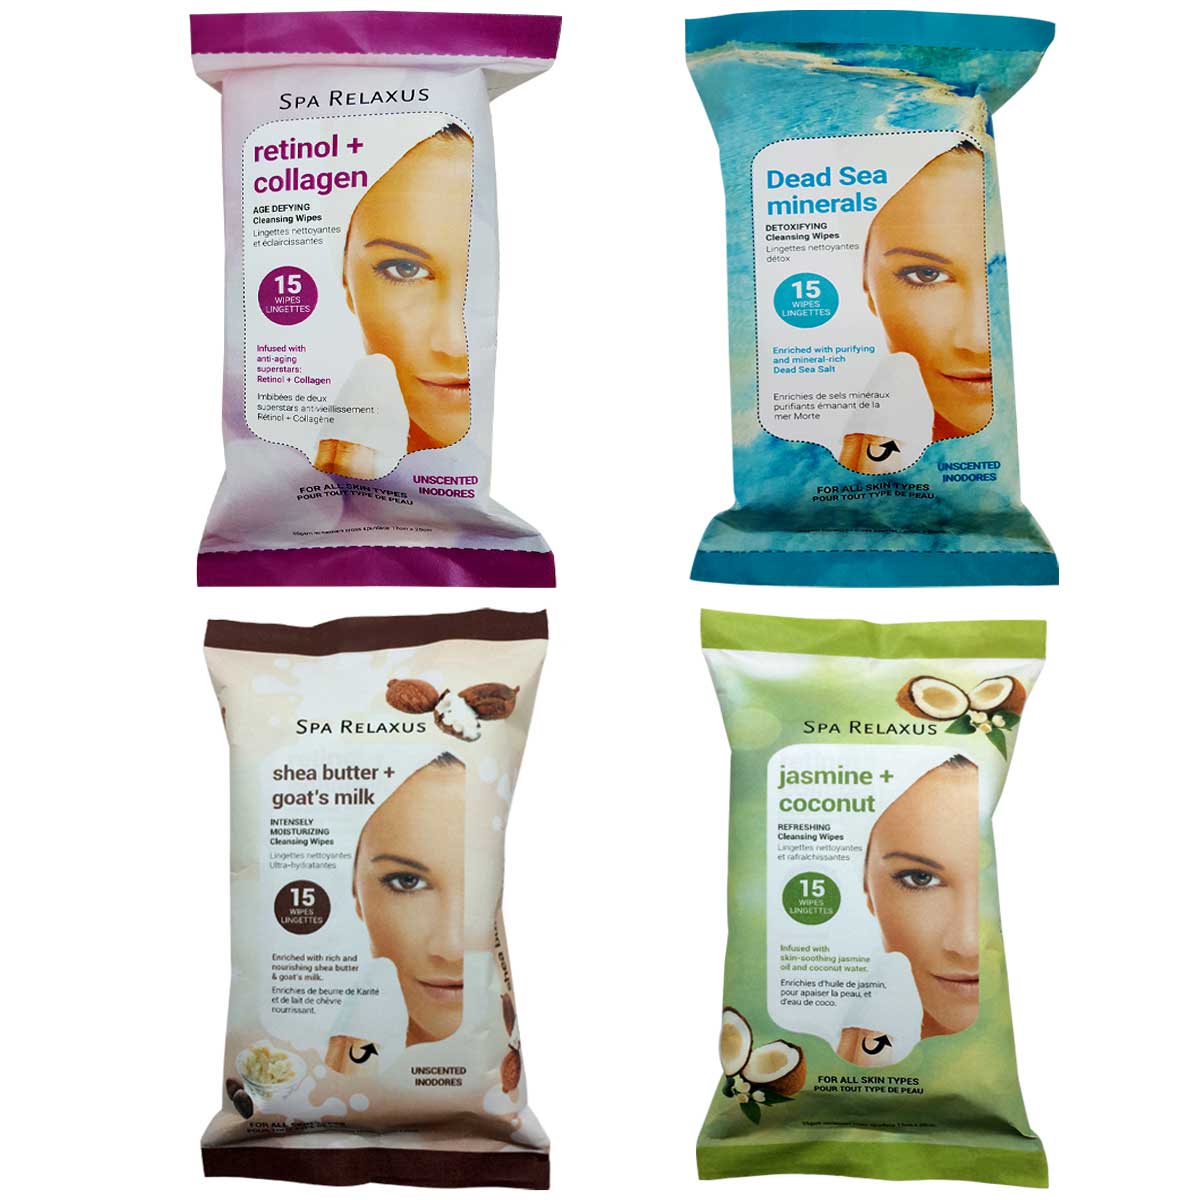 Wholesale Facial Cleansing Wipes Displayer 